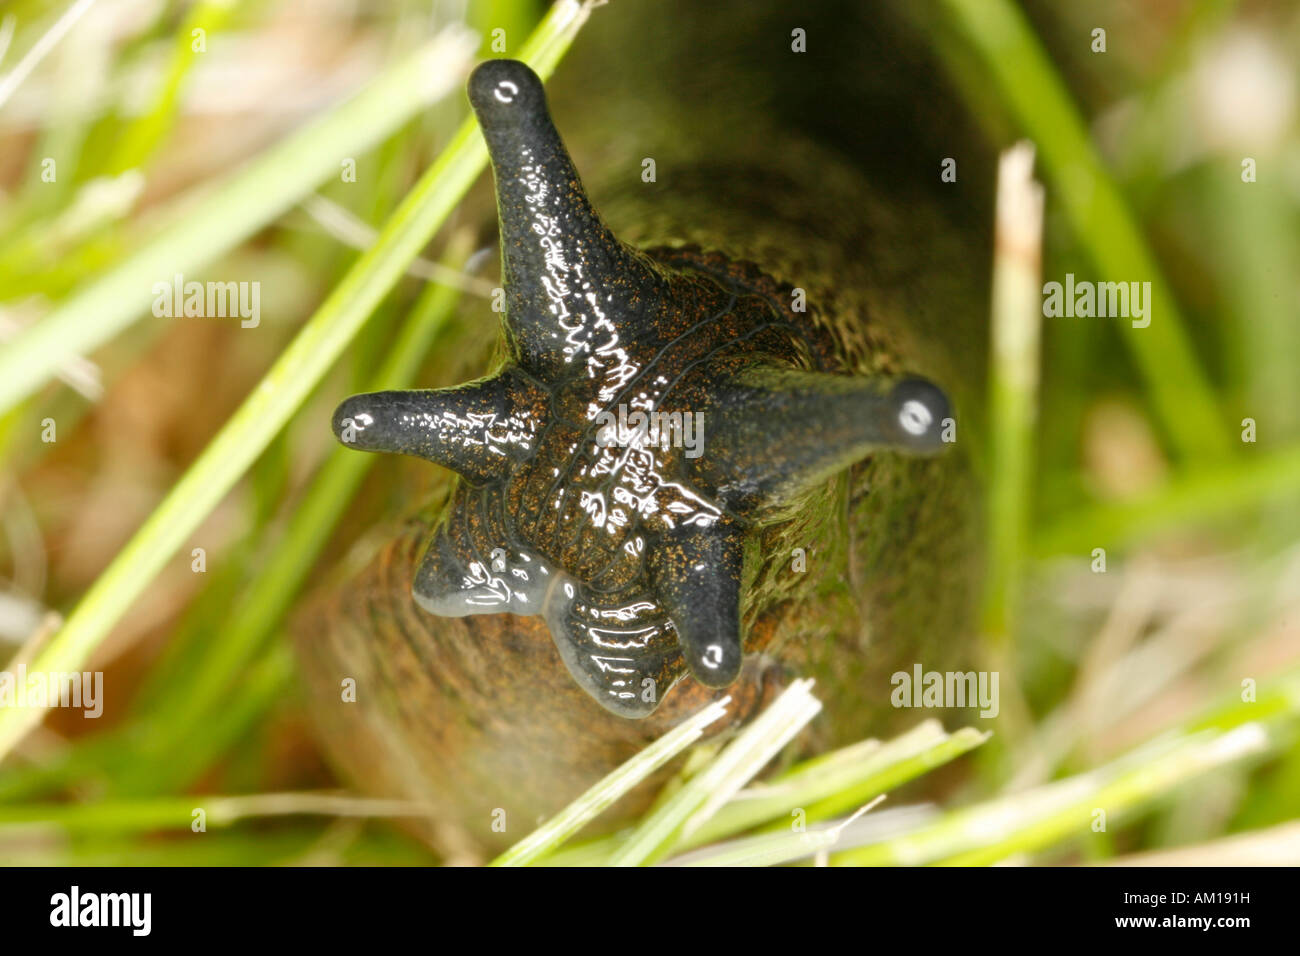 Close-up of a snail's head Stock Photo